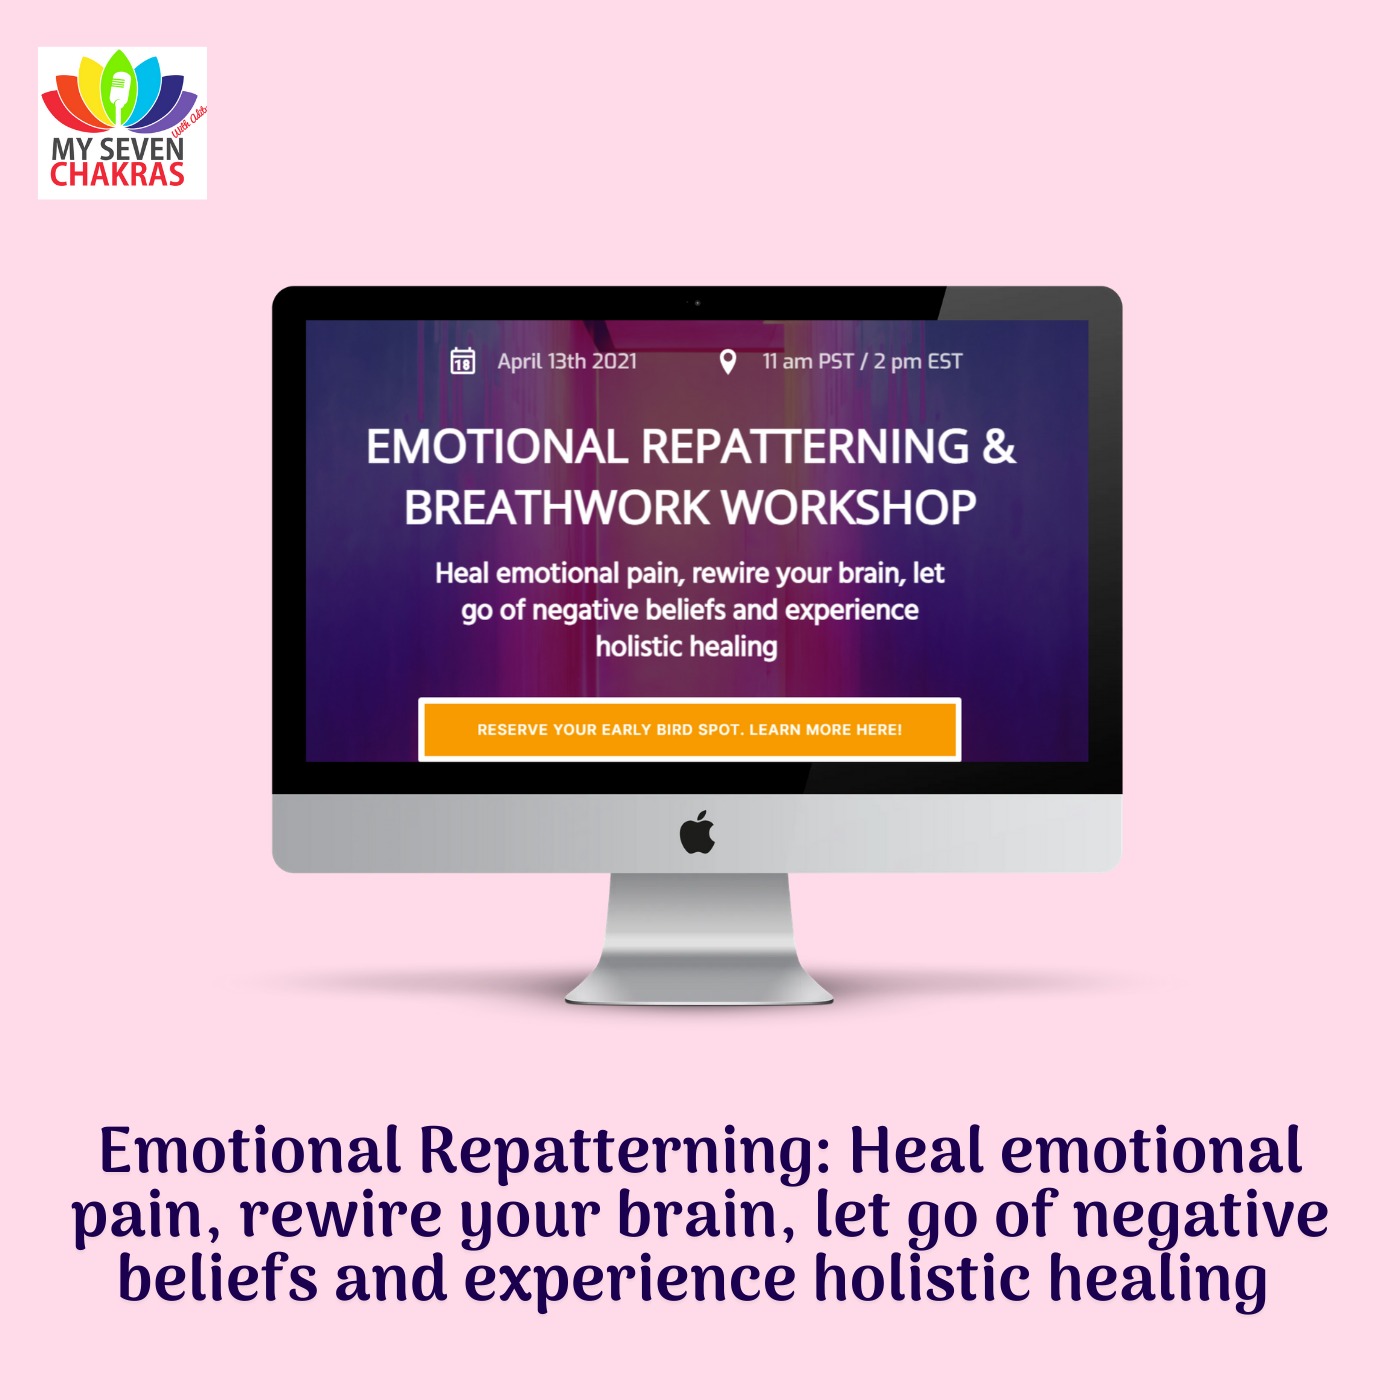 Emotional Repatterning: Heal emotional pain, Rewire your brain, Let go of negative beliefs and Experience holistic healing